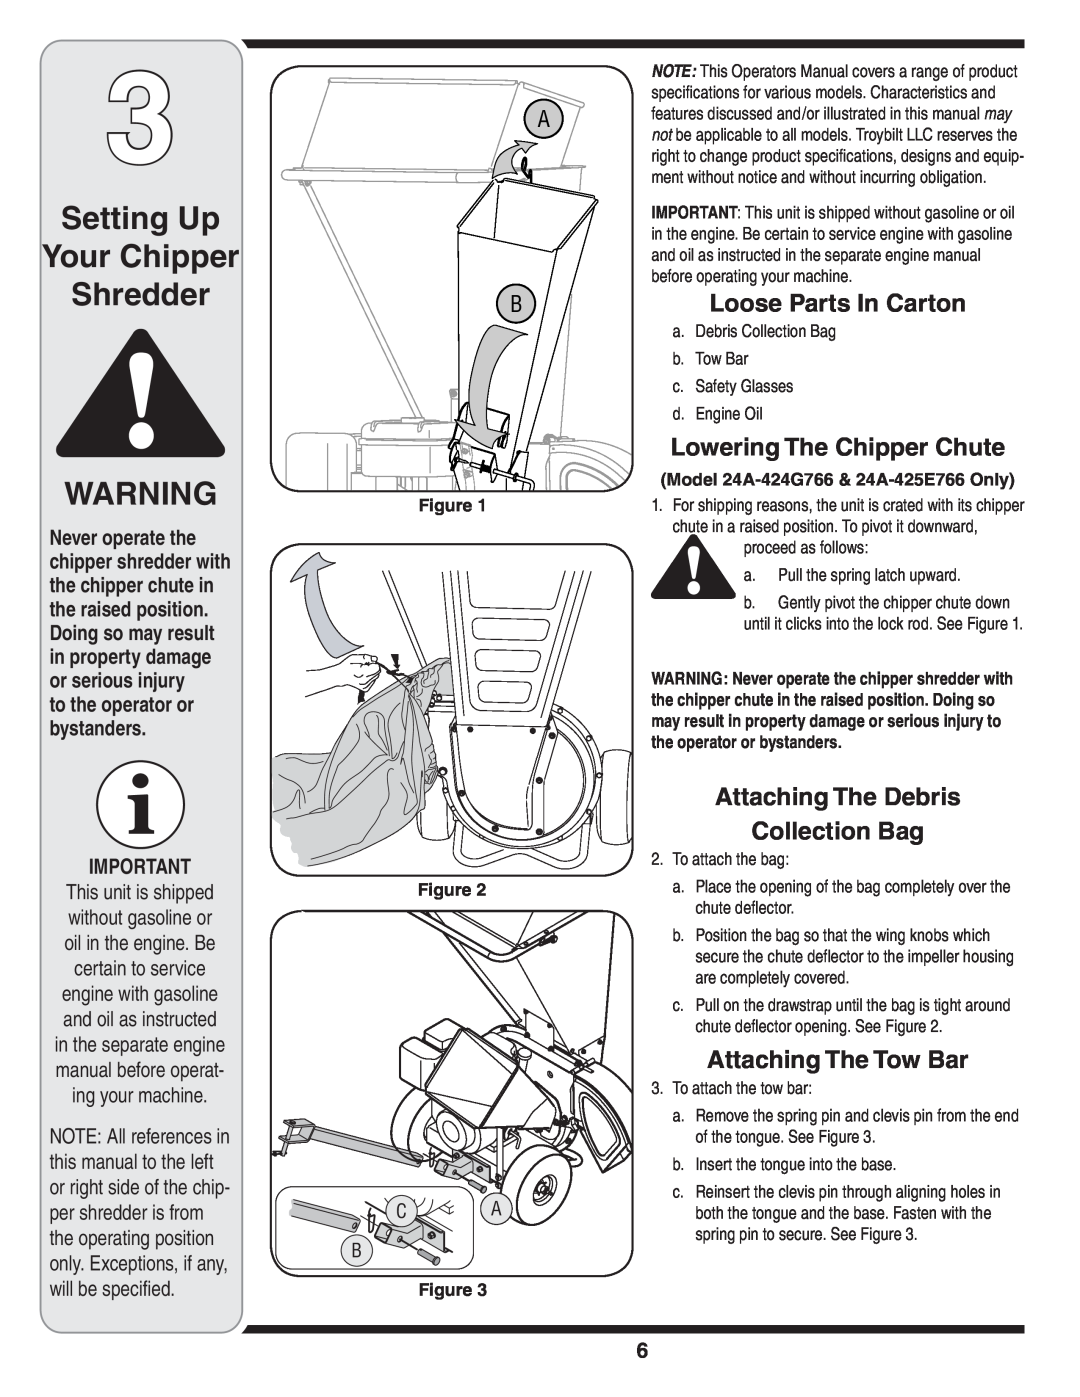 Troy-Bilt 410, 420 warranty Setting Up Your Chipper ShredderB, Loose Parts In Carton, Lowering The Chipper Chute 